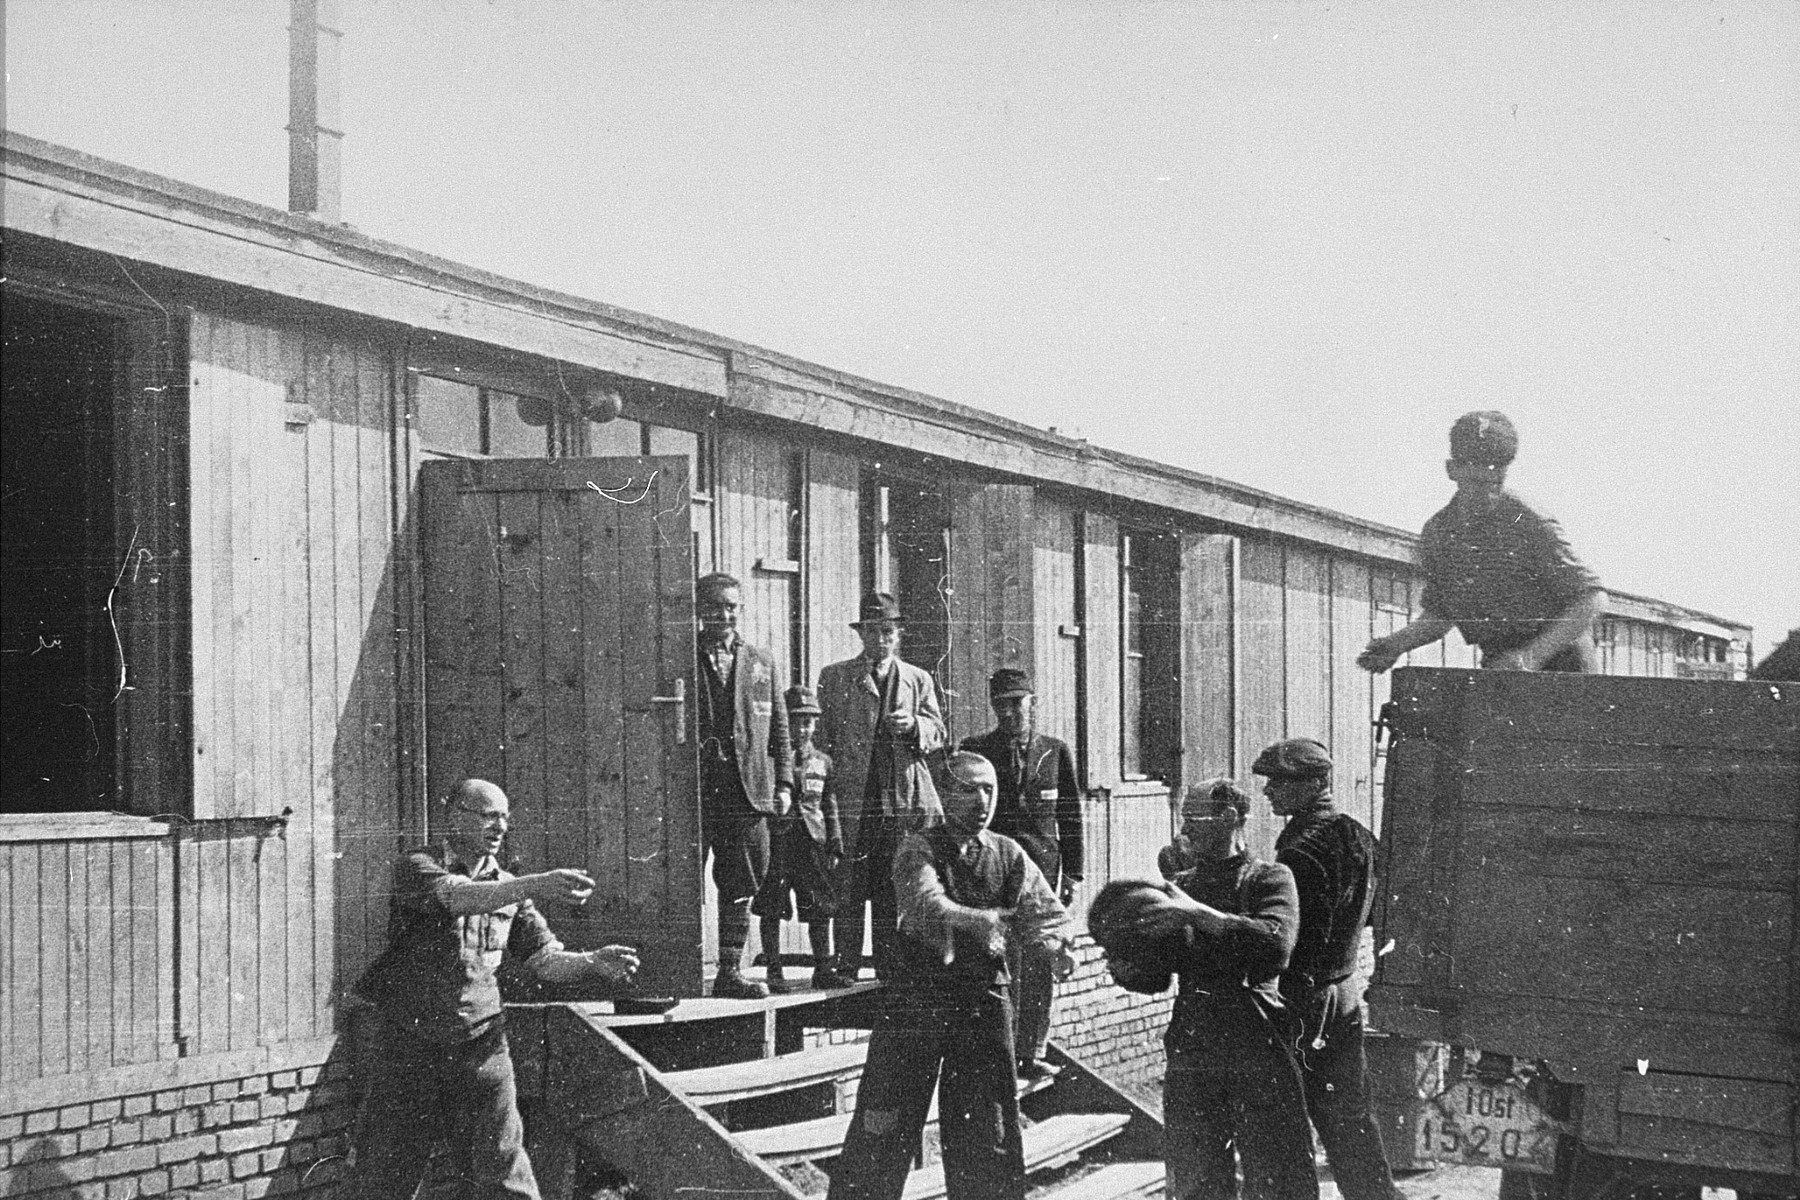 Jewish prisoners in Plaszow unload bread into part of the Madritch factory.  

The Madritch factory utilized concentration camp labor to produce uniforms for the German army.